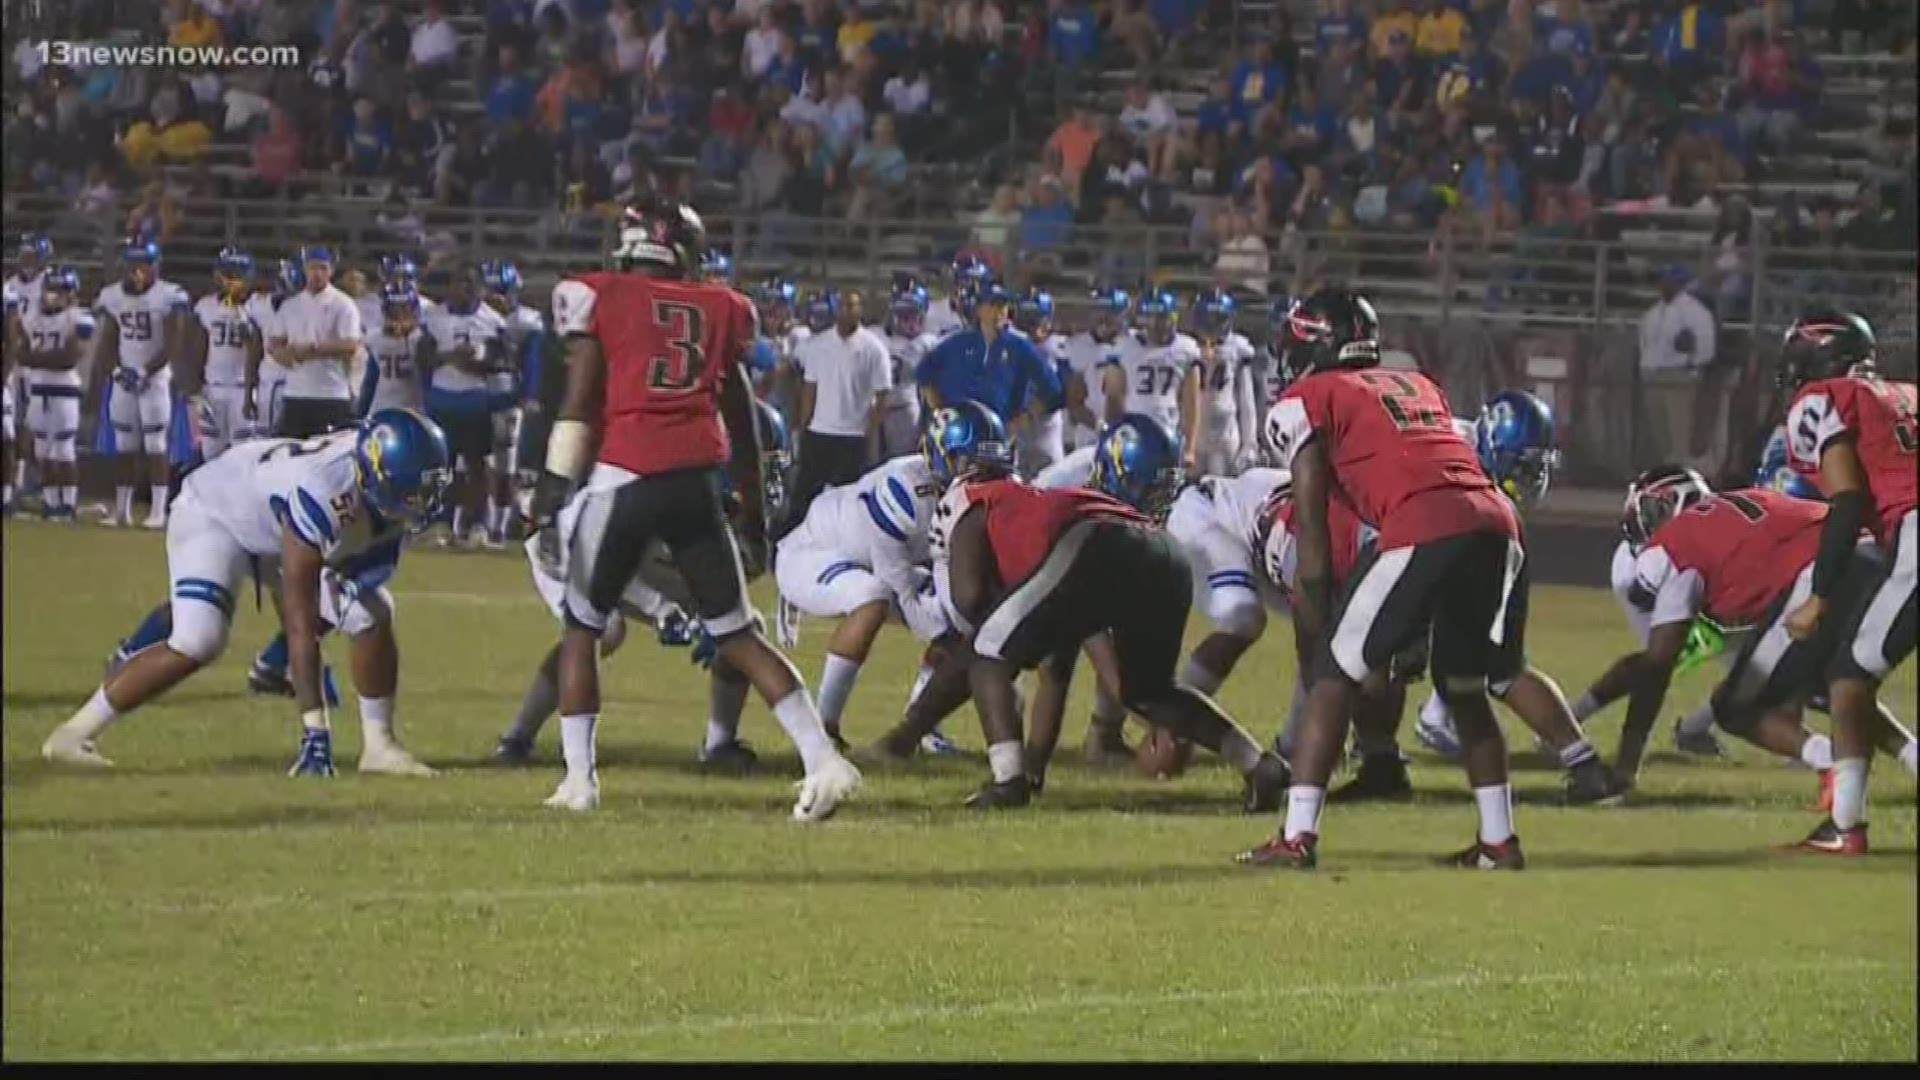 A couple of key games on the South Side saw Oscar Smith win easily over Nansemond River 35-8 and Bayside holds off First Colonial 19-16.